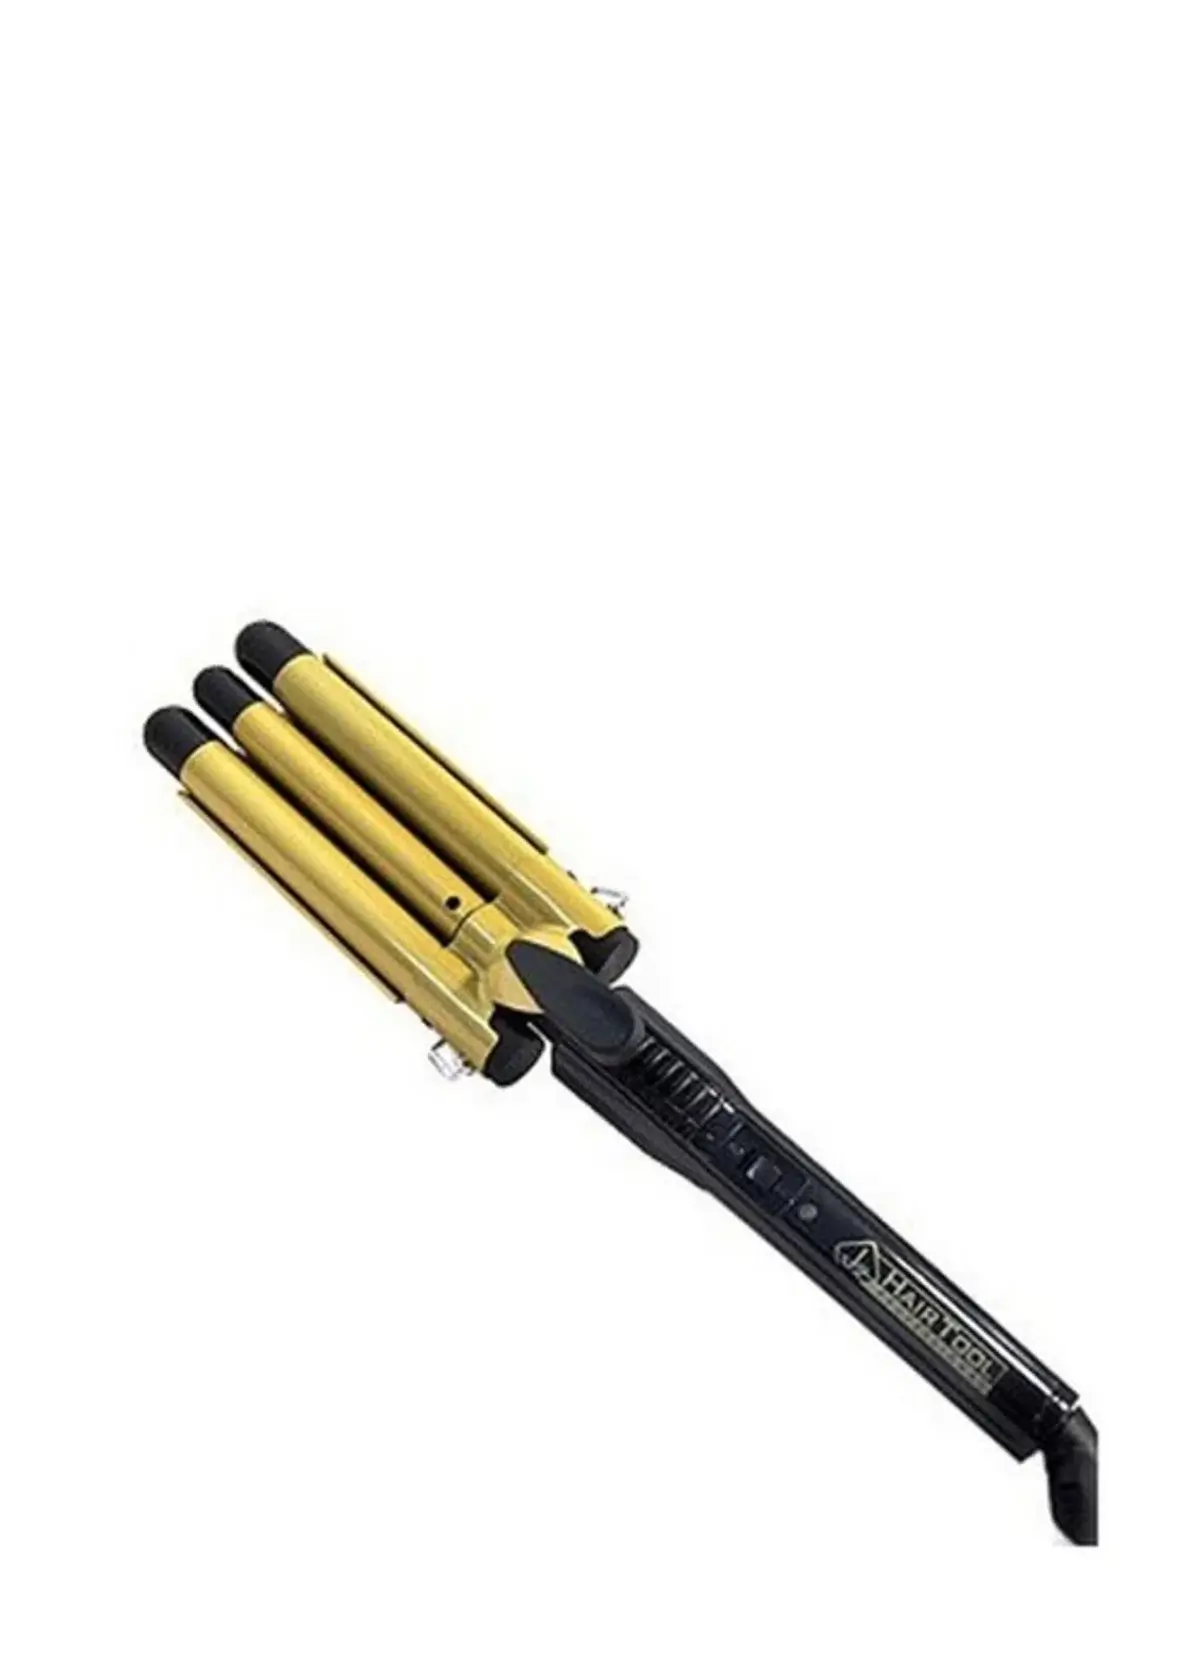 Can I use a triple barrel curling iron on all hair types?